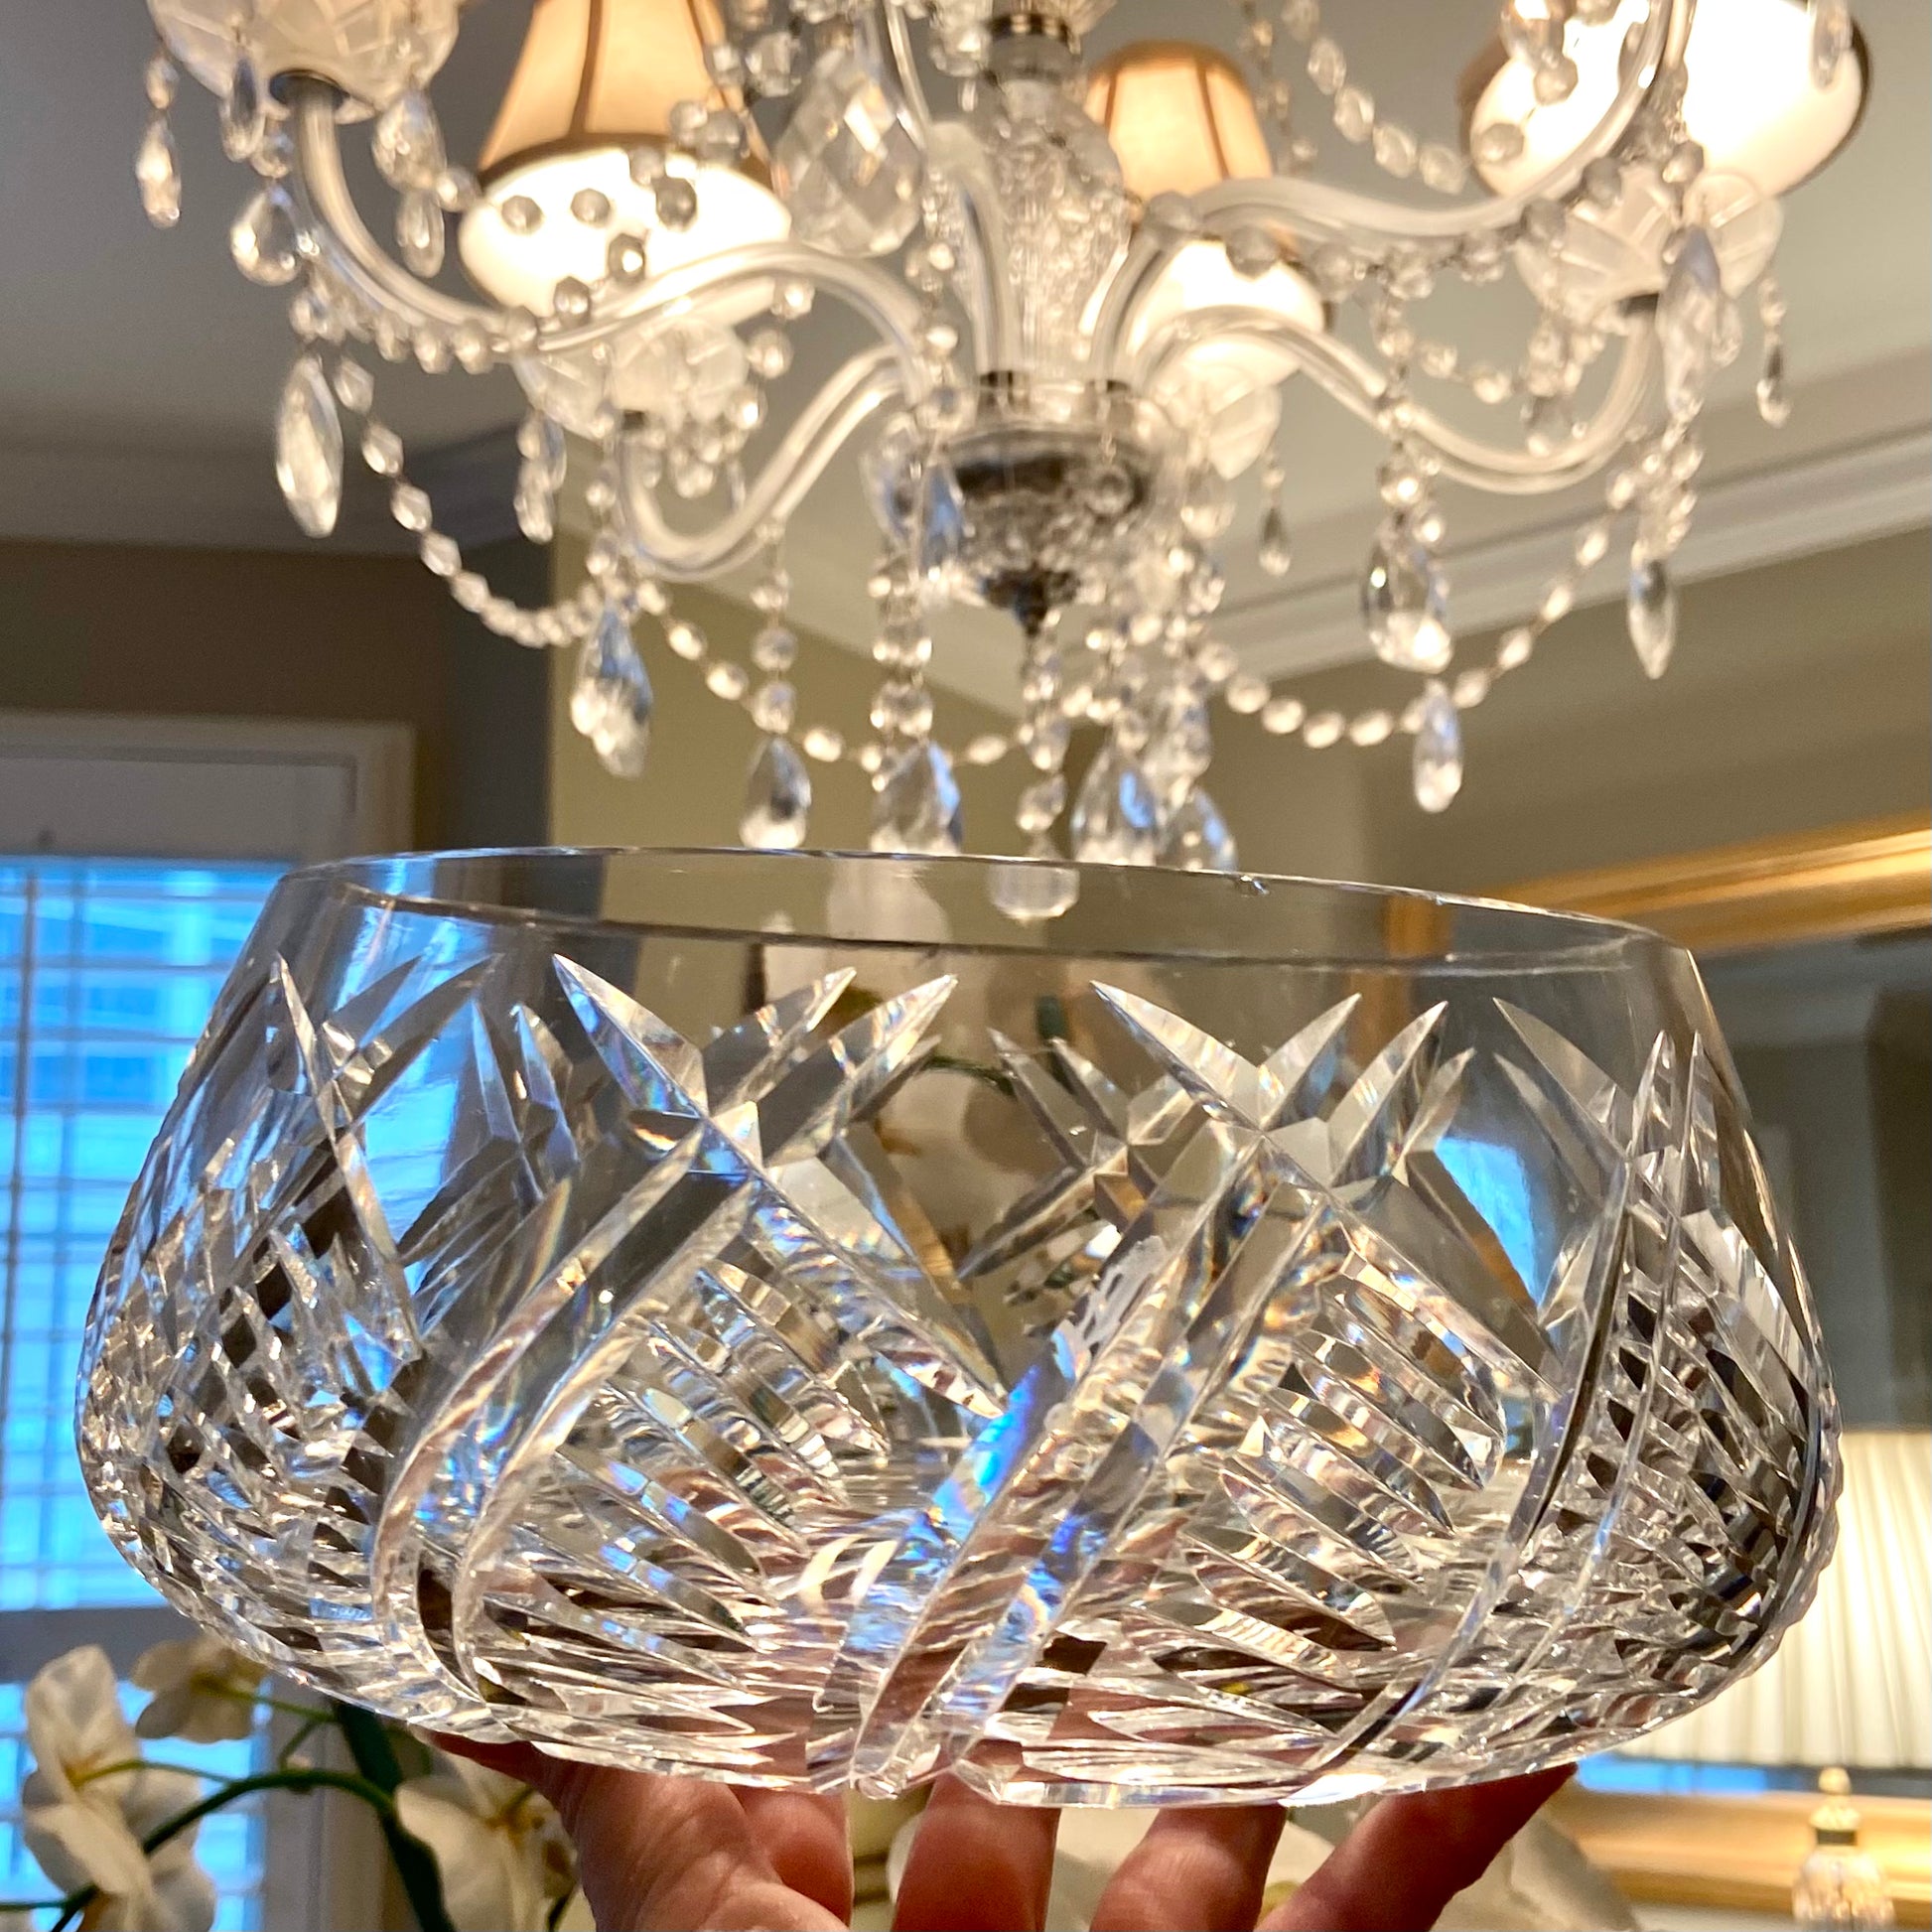 Waterford Crystal Lismore 60th Anniversary Collection Bowl